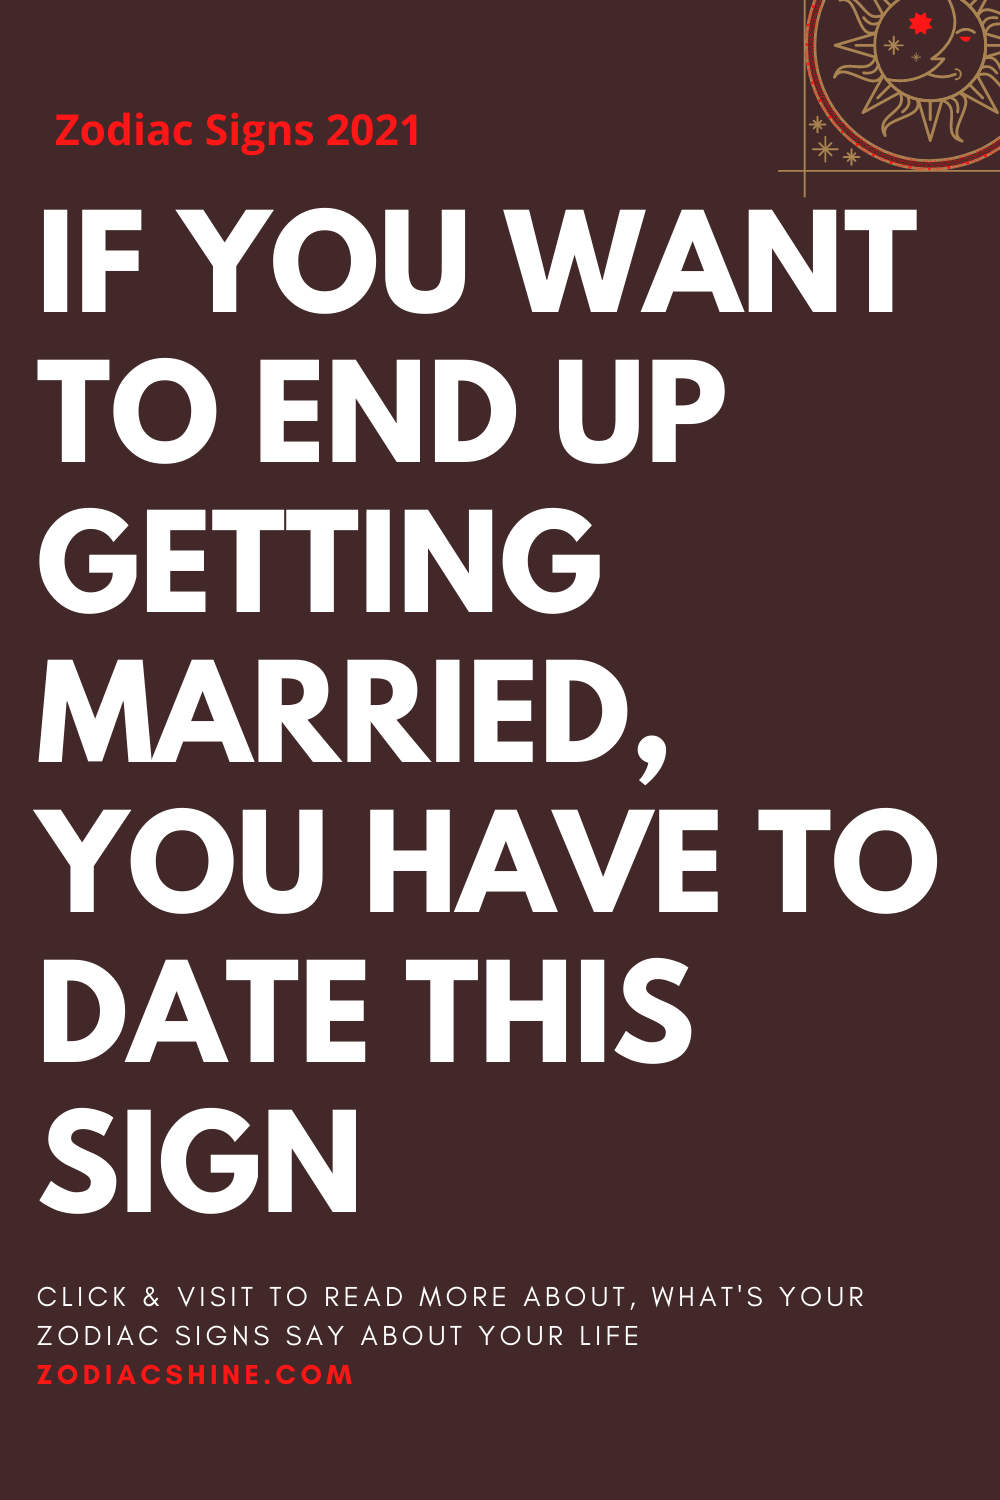 IF YOU WANT TO END UP GETTING MARRIED, YOU HAVE TO DATE THIS SIGN